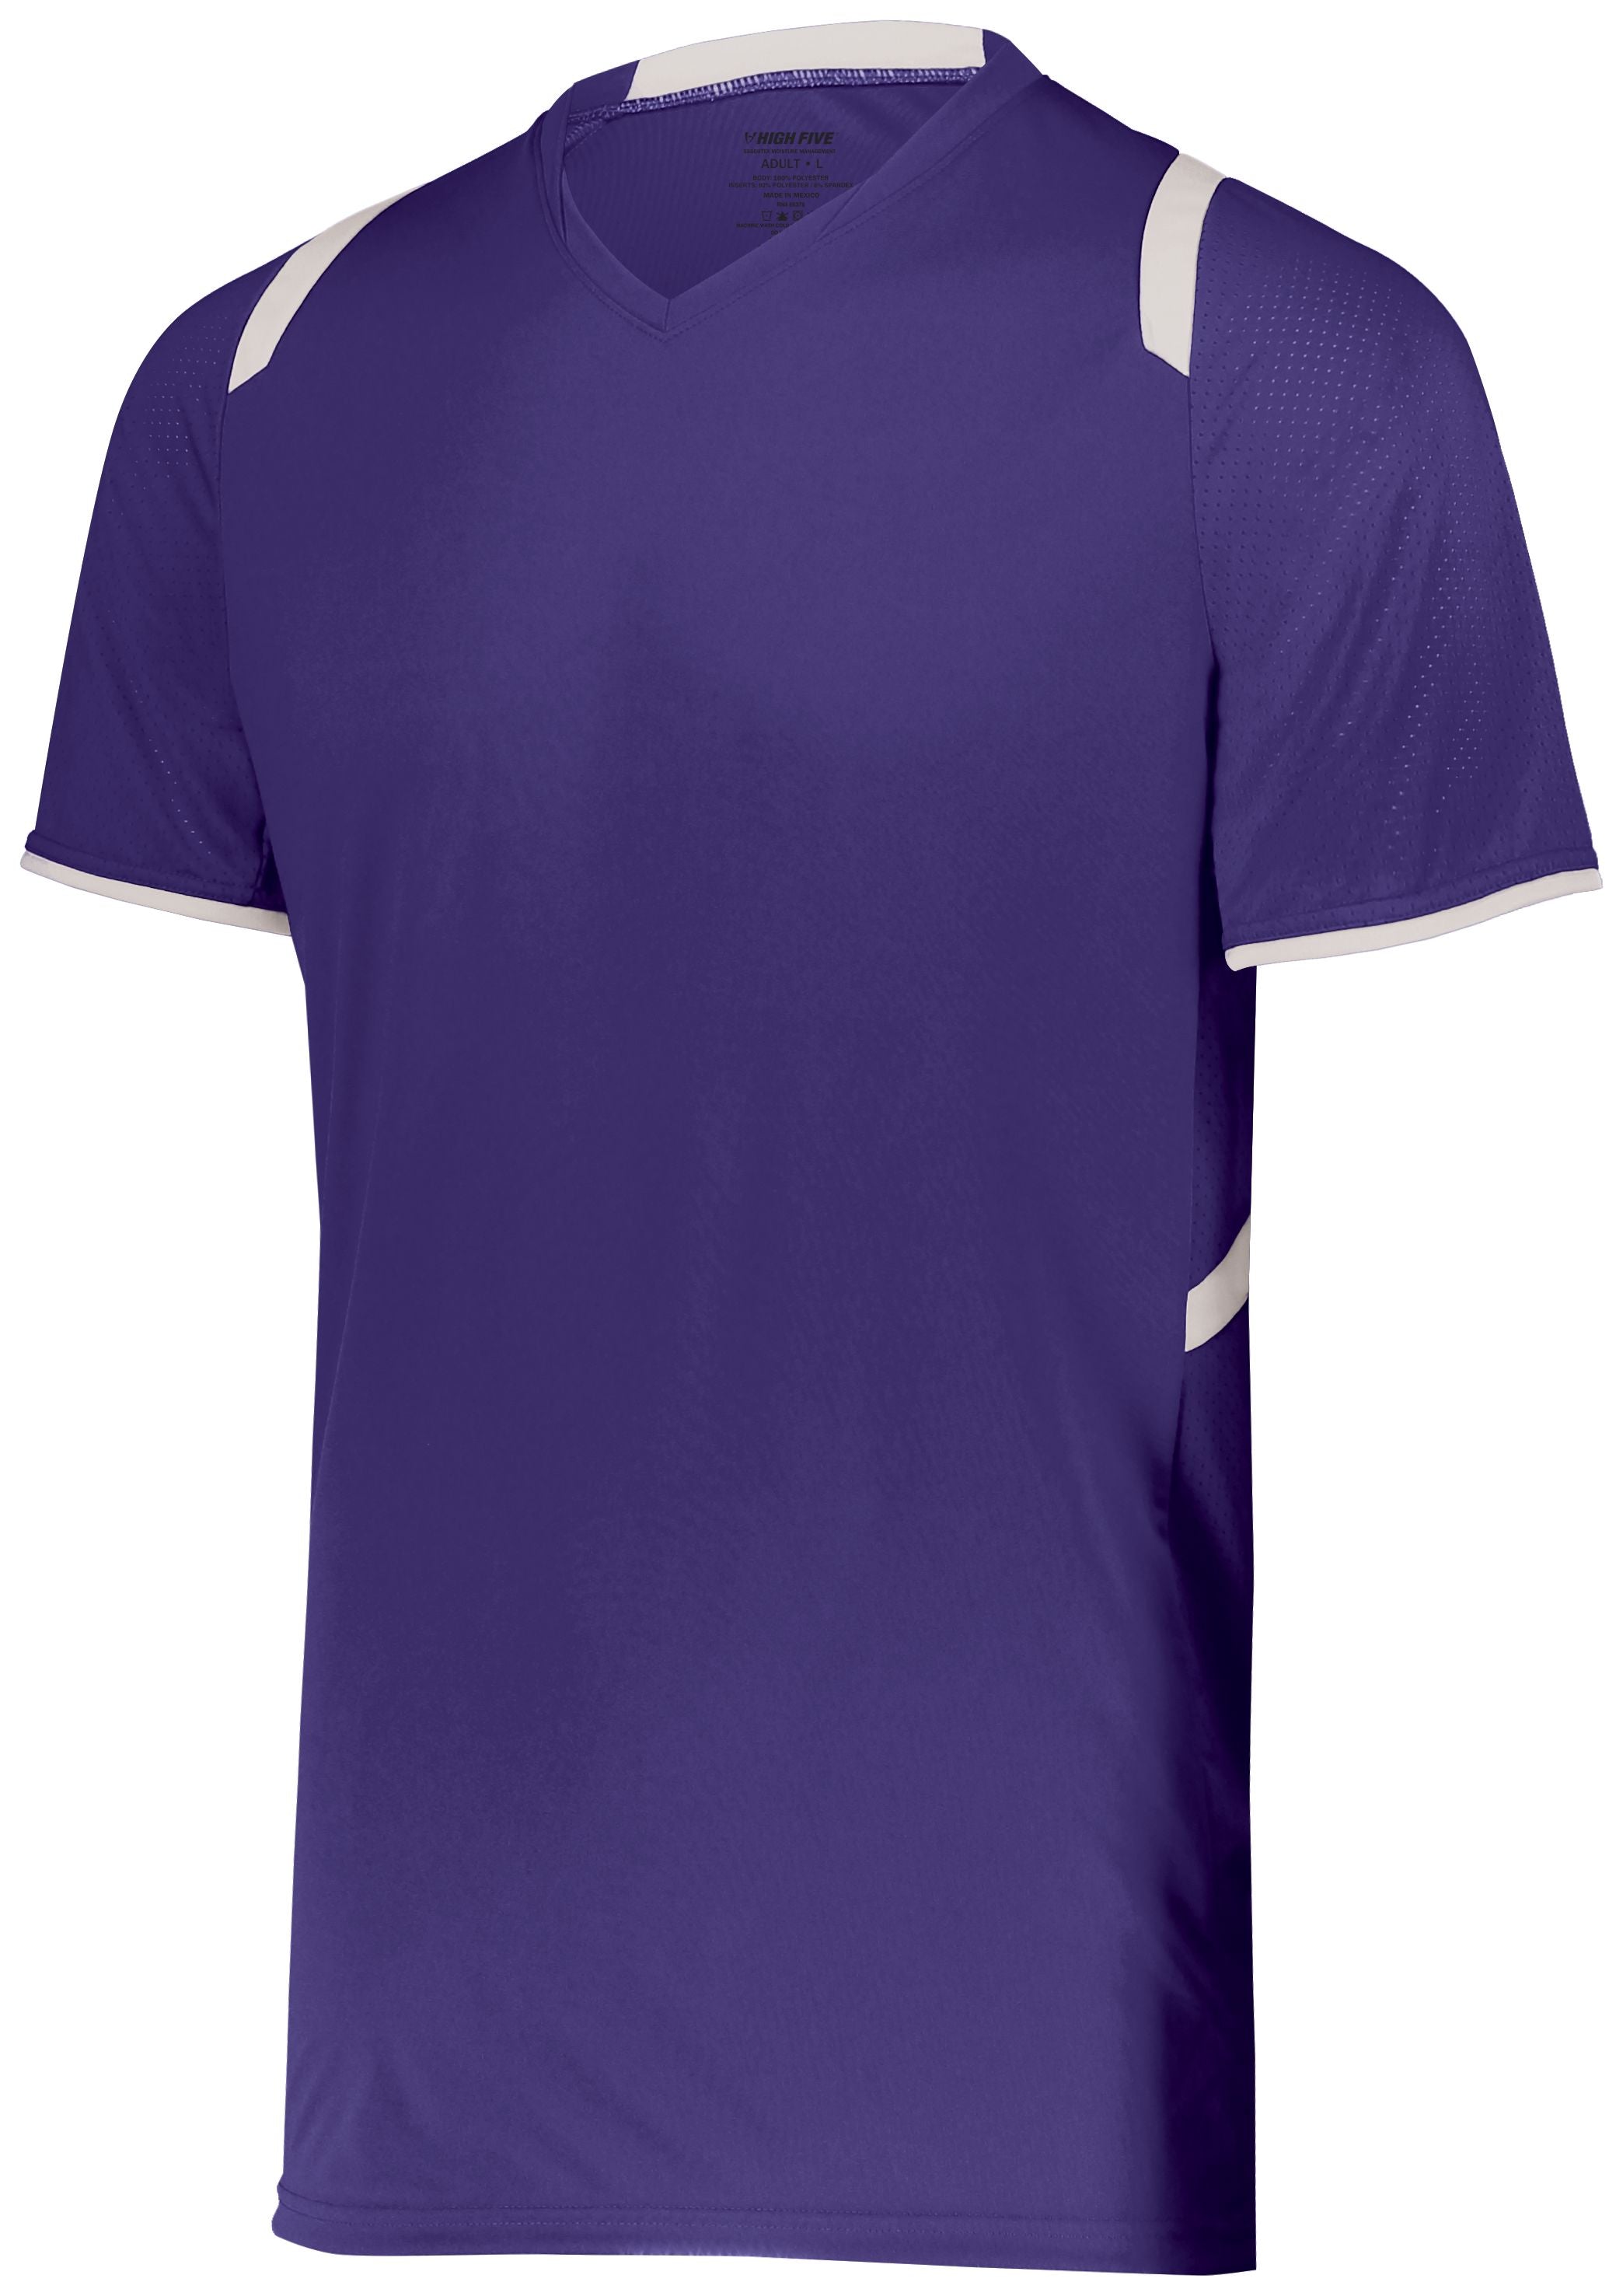 High 5 Youth Millennium Soccer Jersey in Purple/White  -Part of the Youth, Youth-Jersey, High5-Products, Soccer, Shirts, All-Sports-1 product lines at KanaleyCreations.com